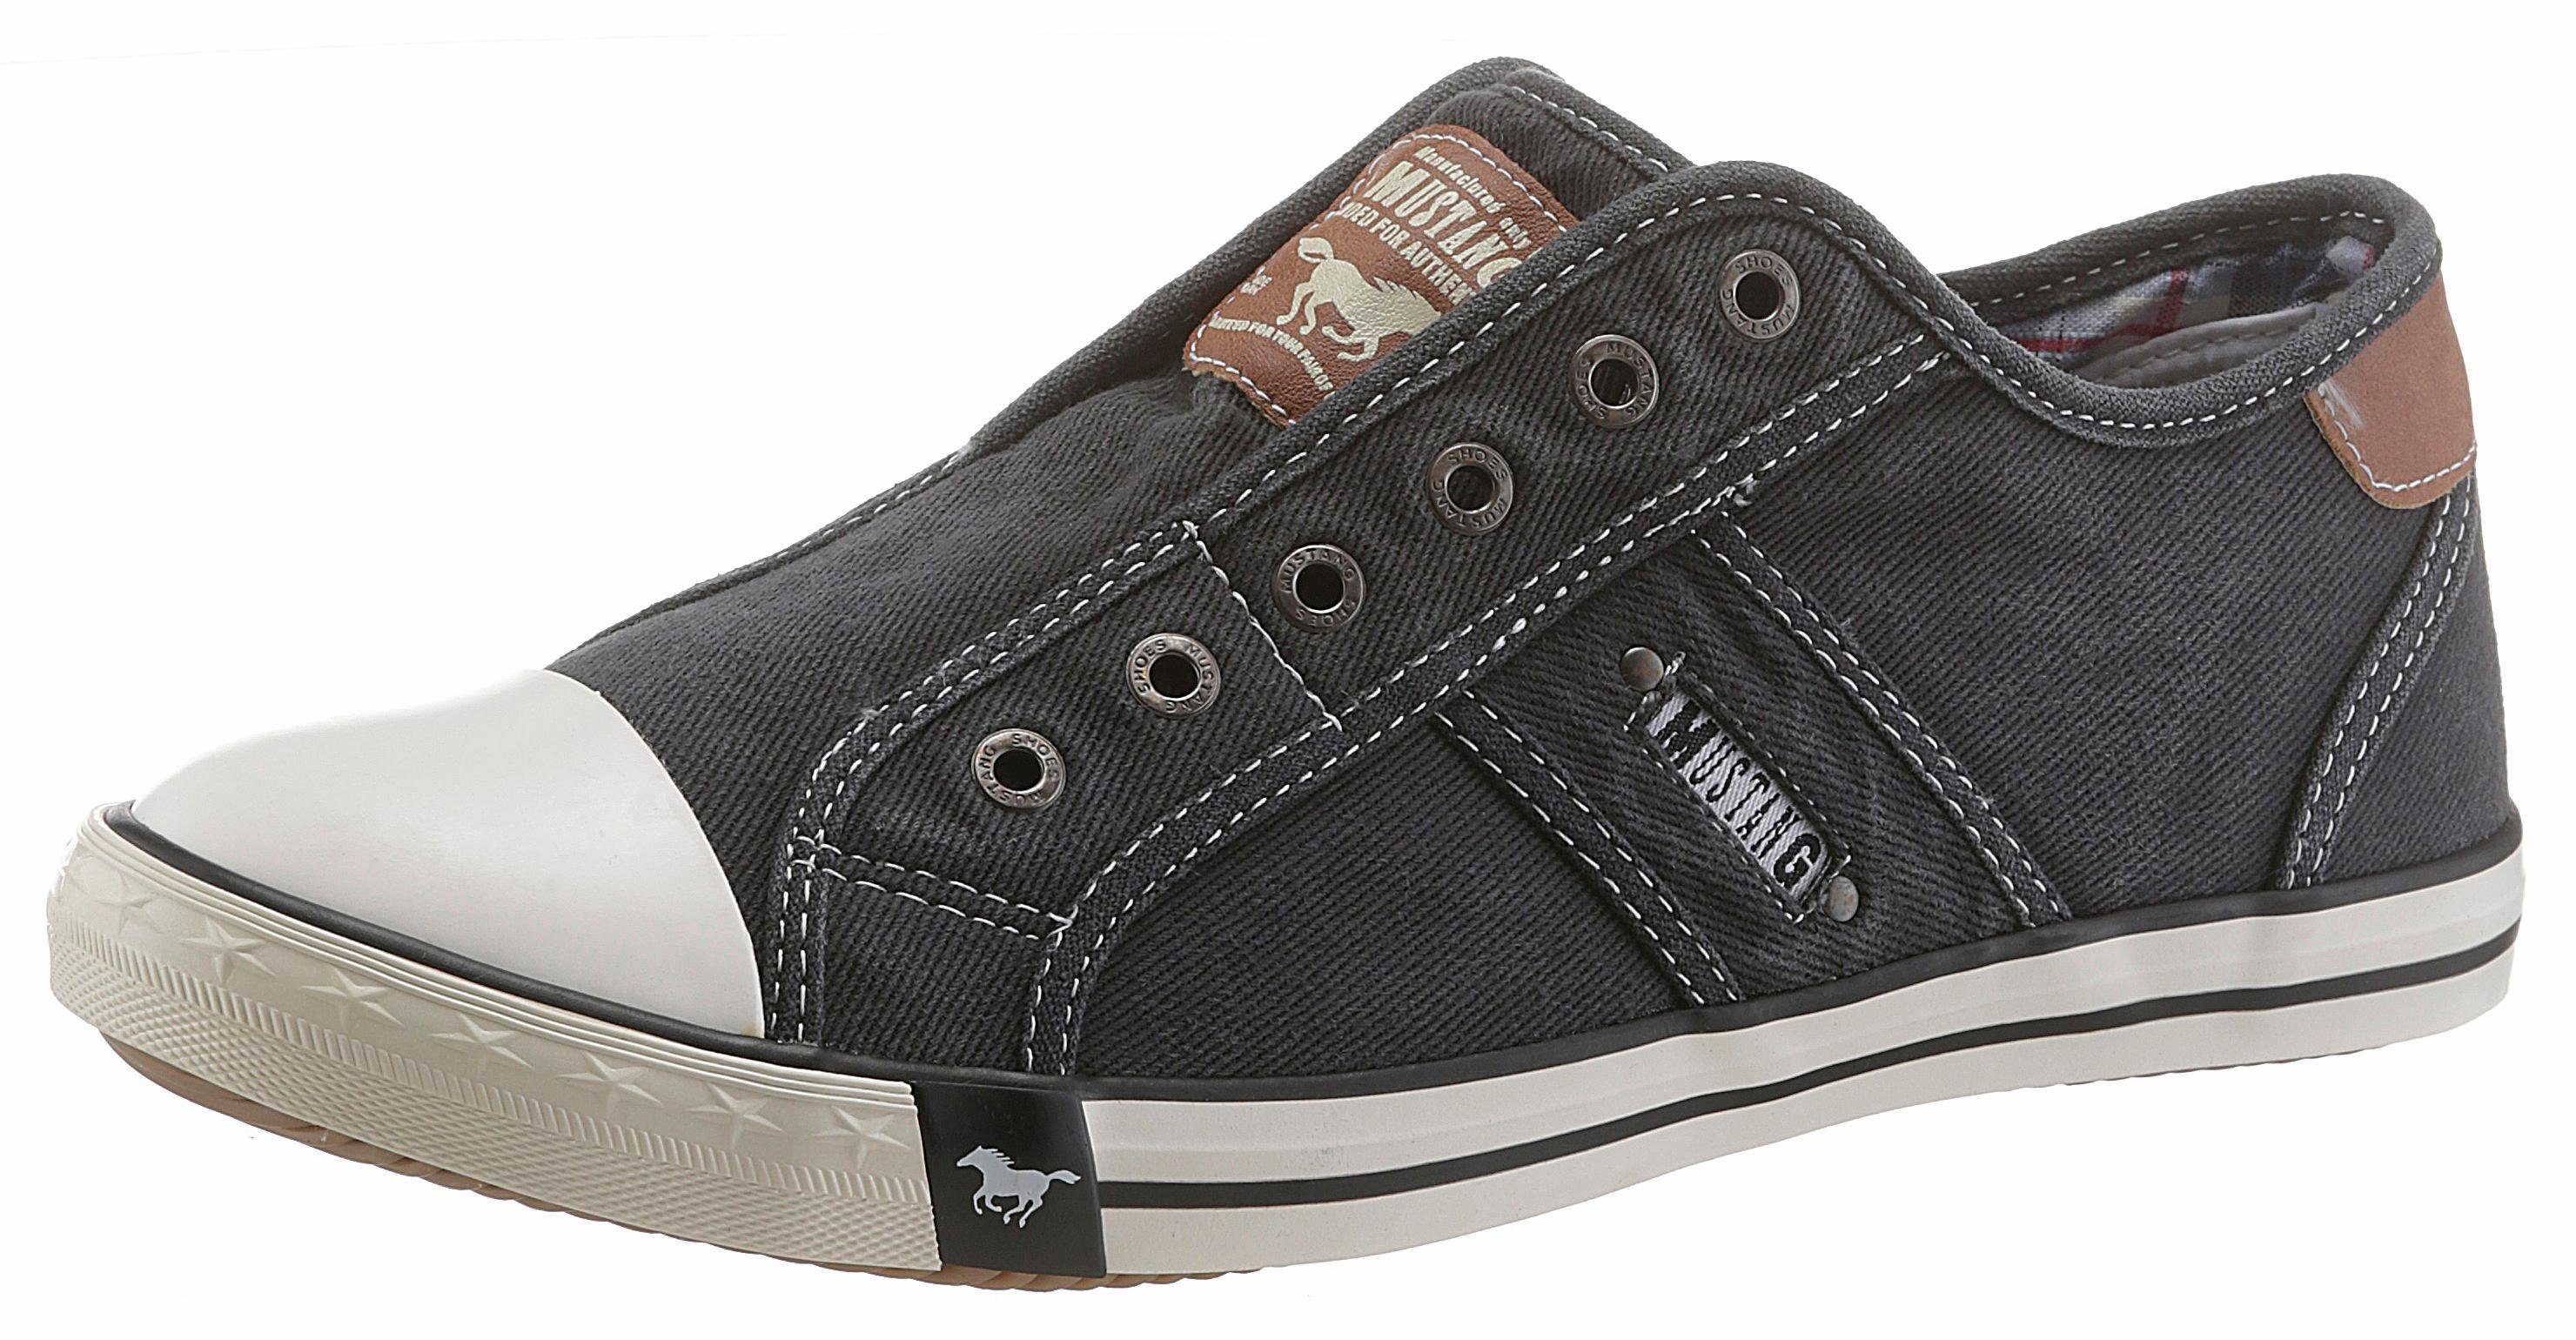 Otto - Mustang Shoes NU 15% KORTING: Mustang Shoes sneakers